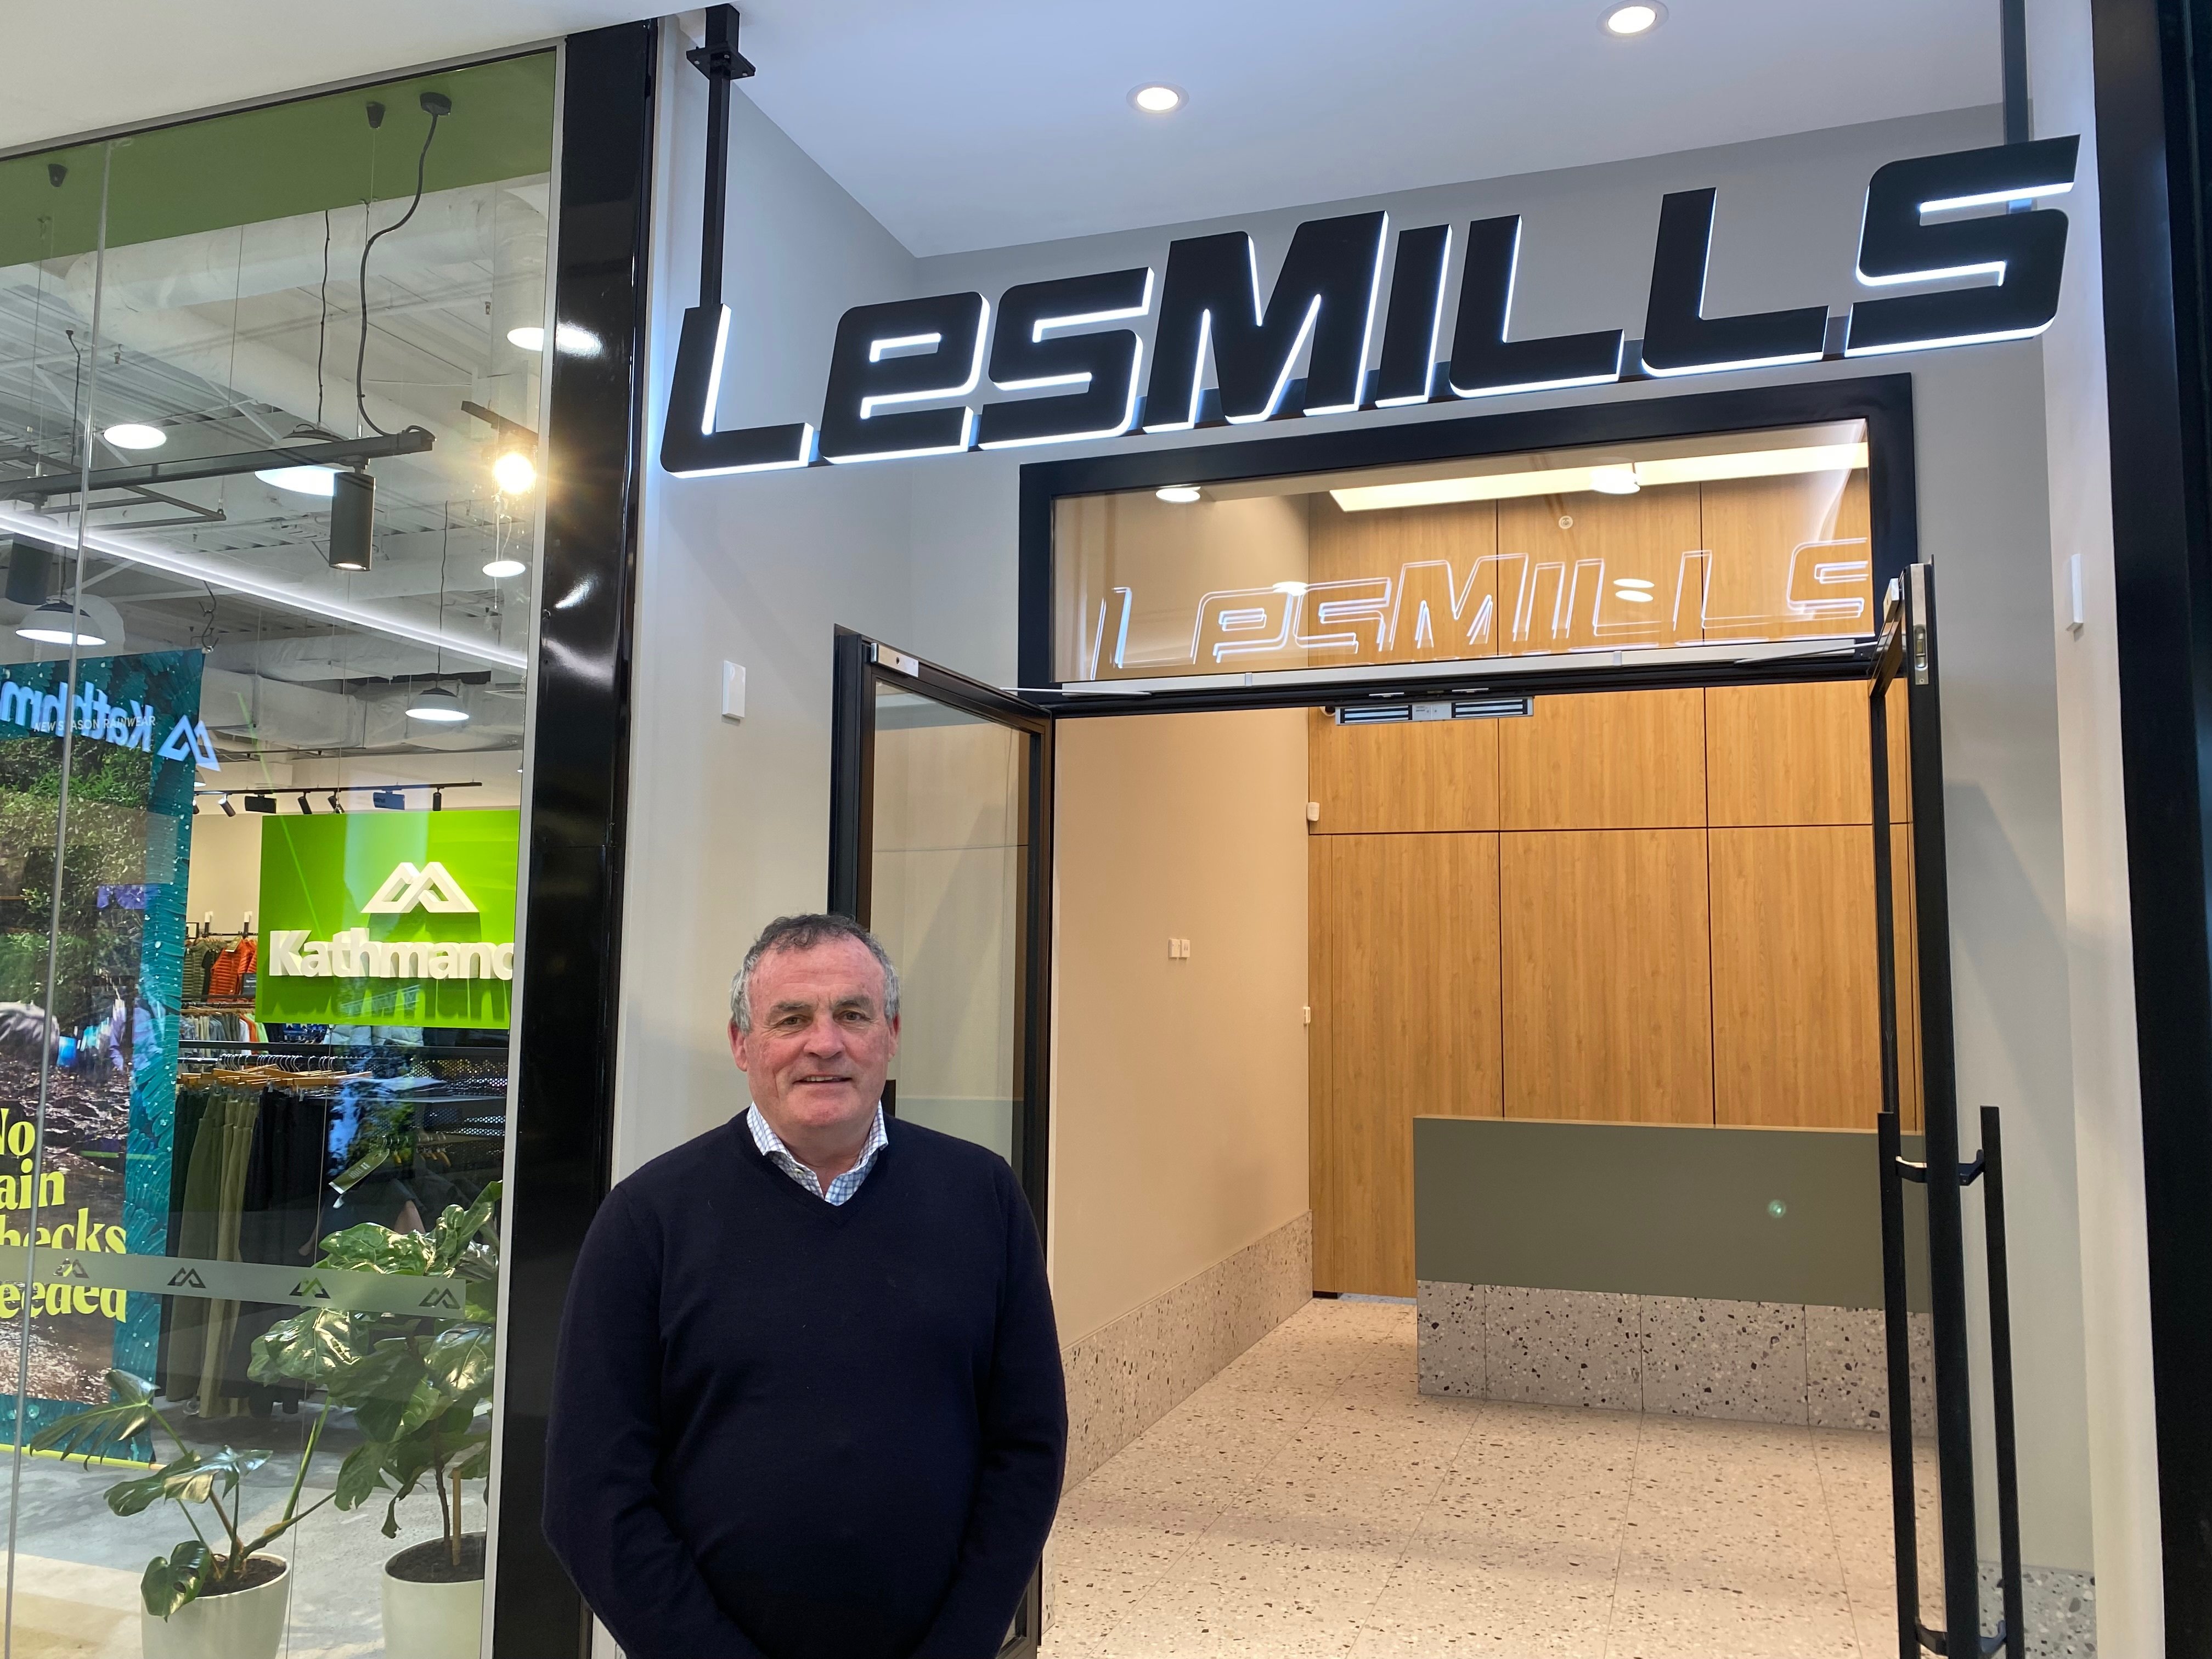 Les Mills counting down to its move to the mall